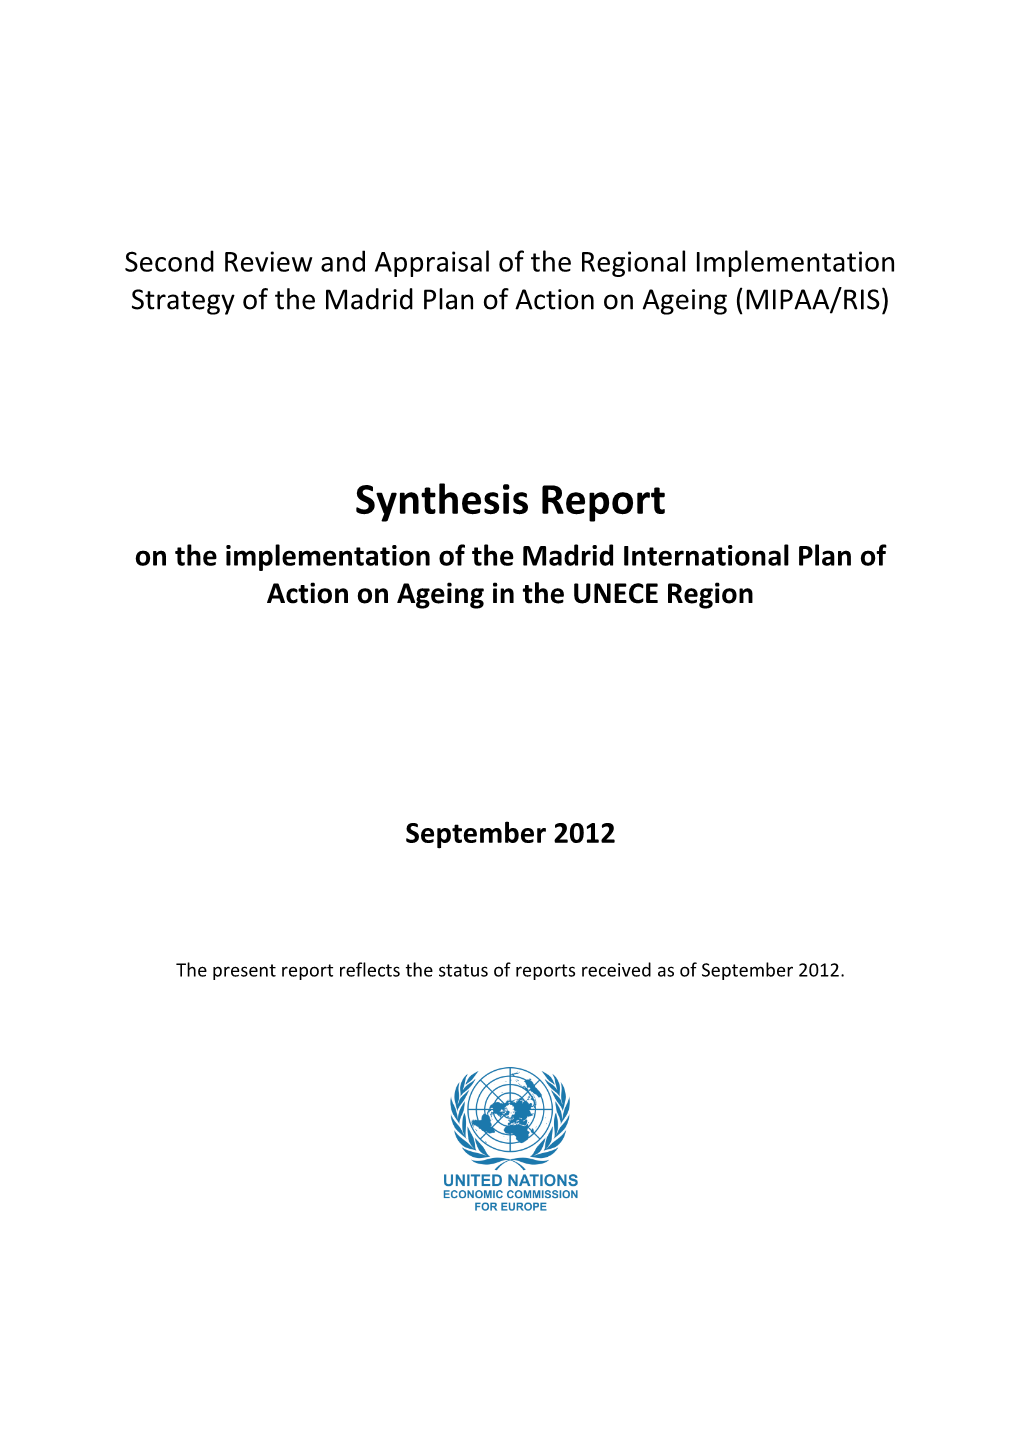 Synthesis Report on the Implementation of the Madrid International Plan of Action on Ageing in the UNECE Region